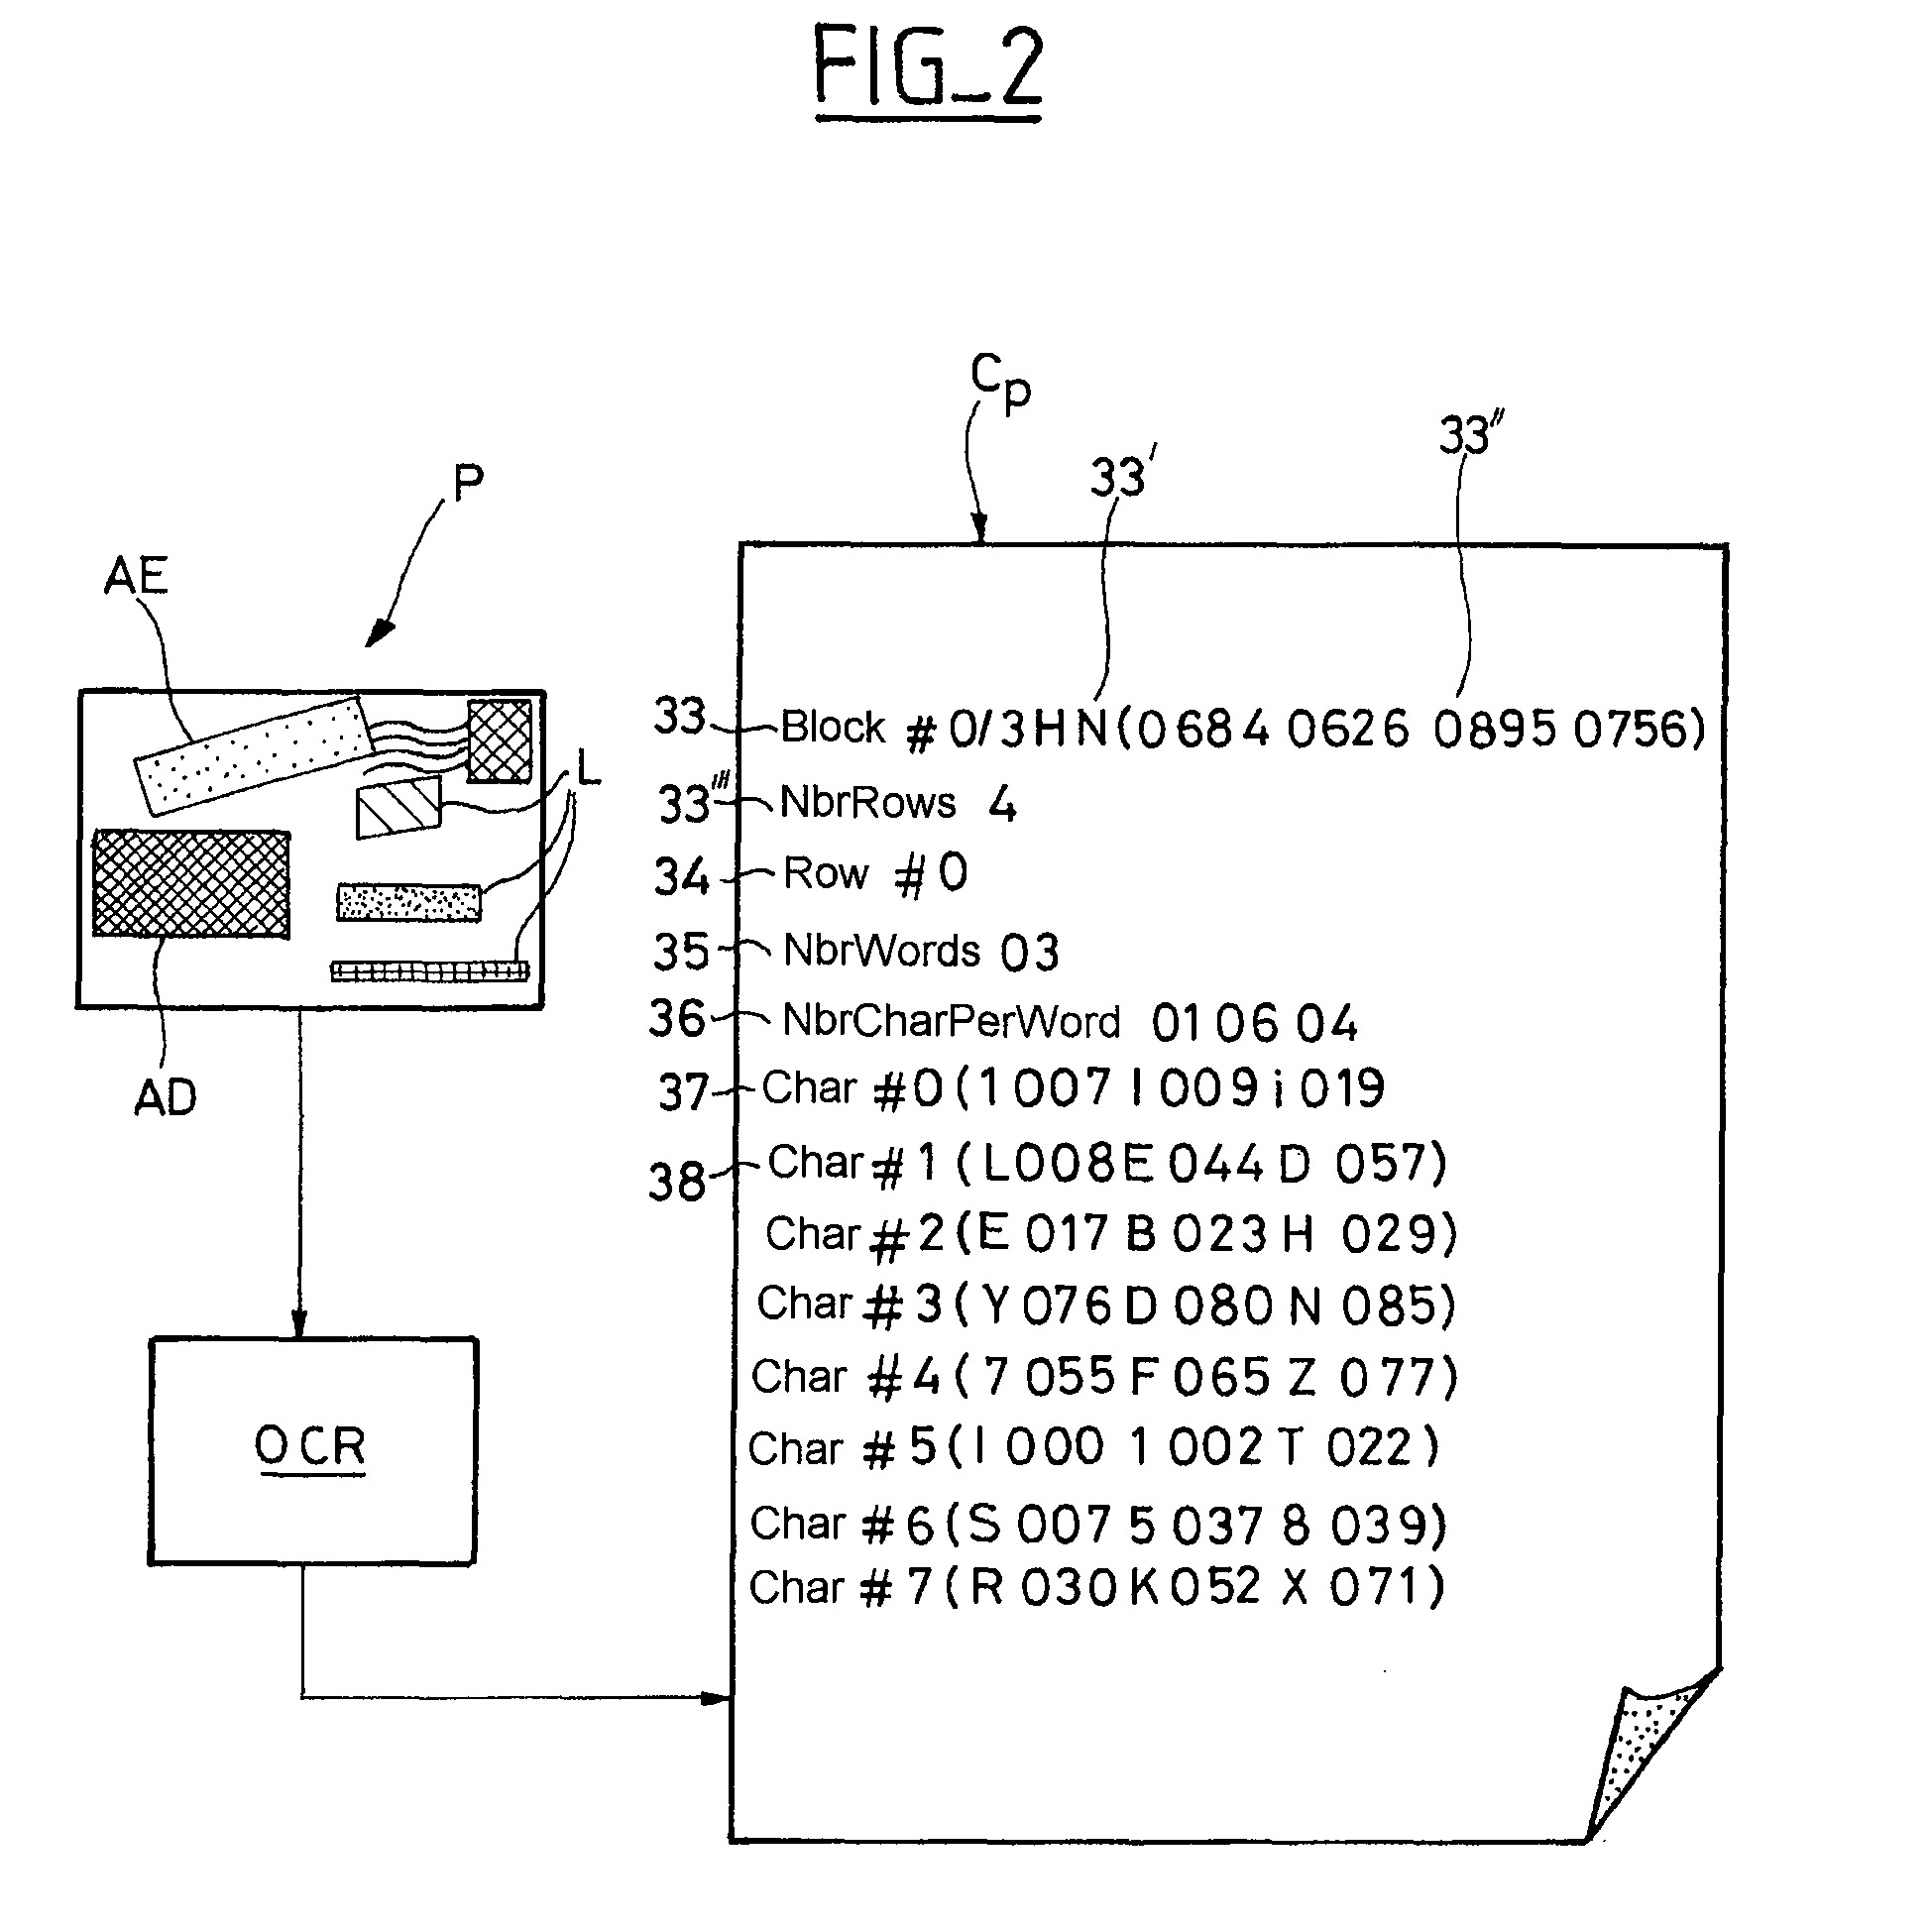 Method of processing mailpieces using customer codes associated with digital fingerprints